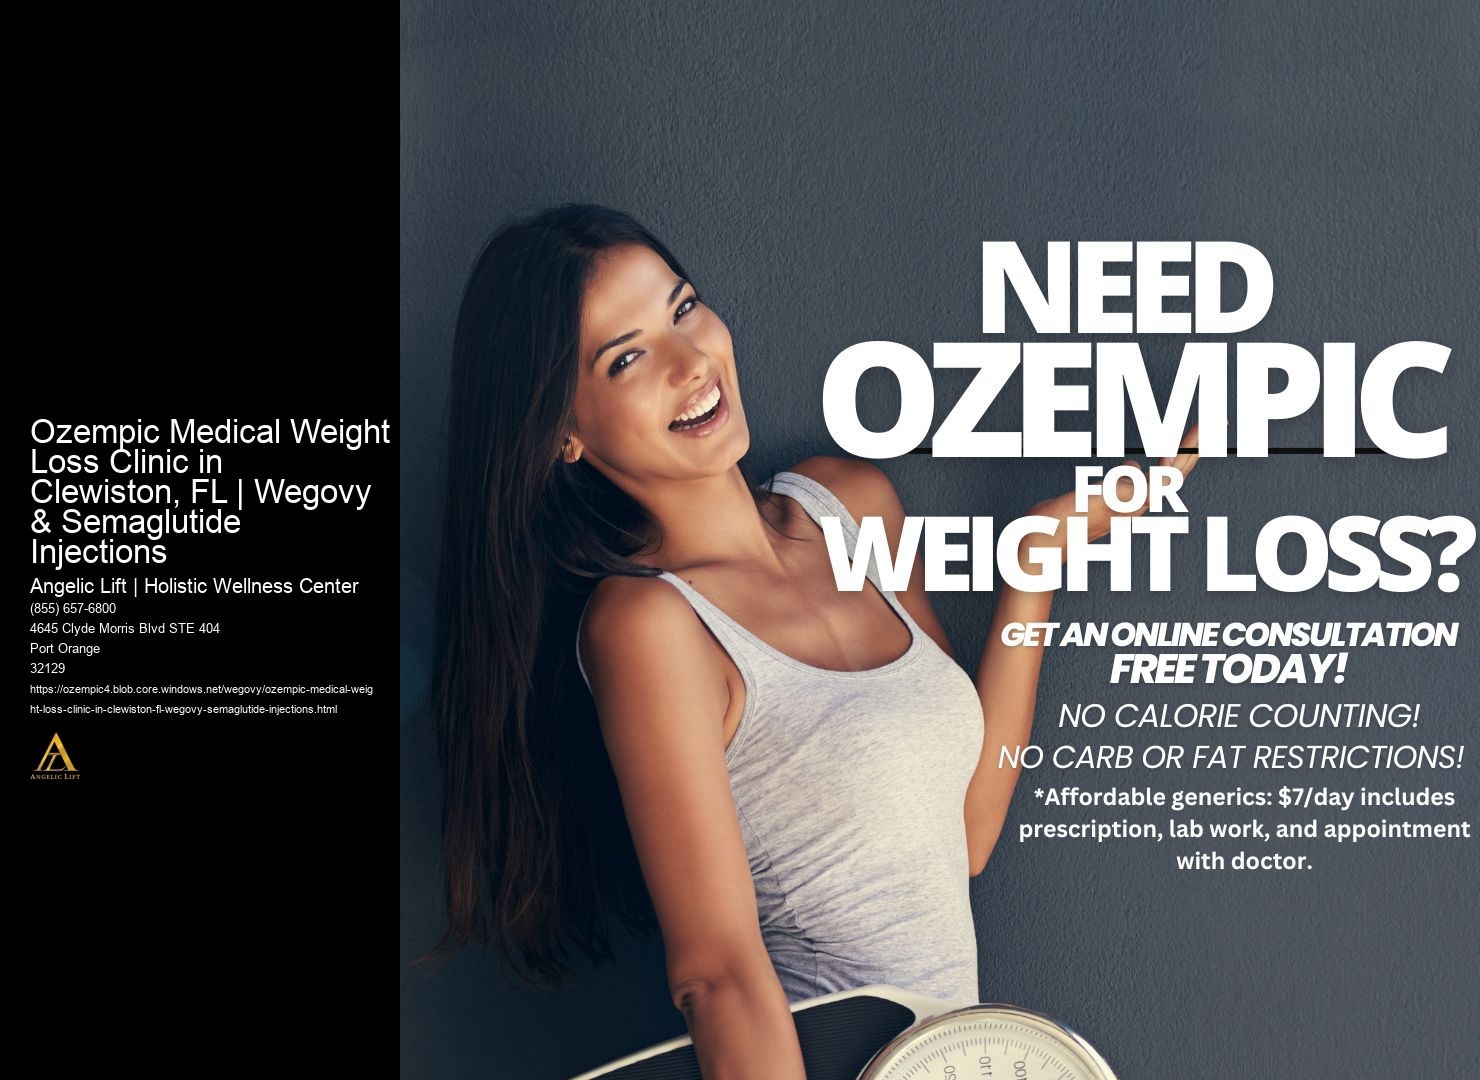 Ozempic Medical Weight Loss Clinic in Clewiston, FL | Wegovy & Semaglutide Injections